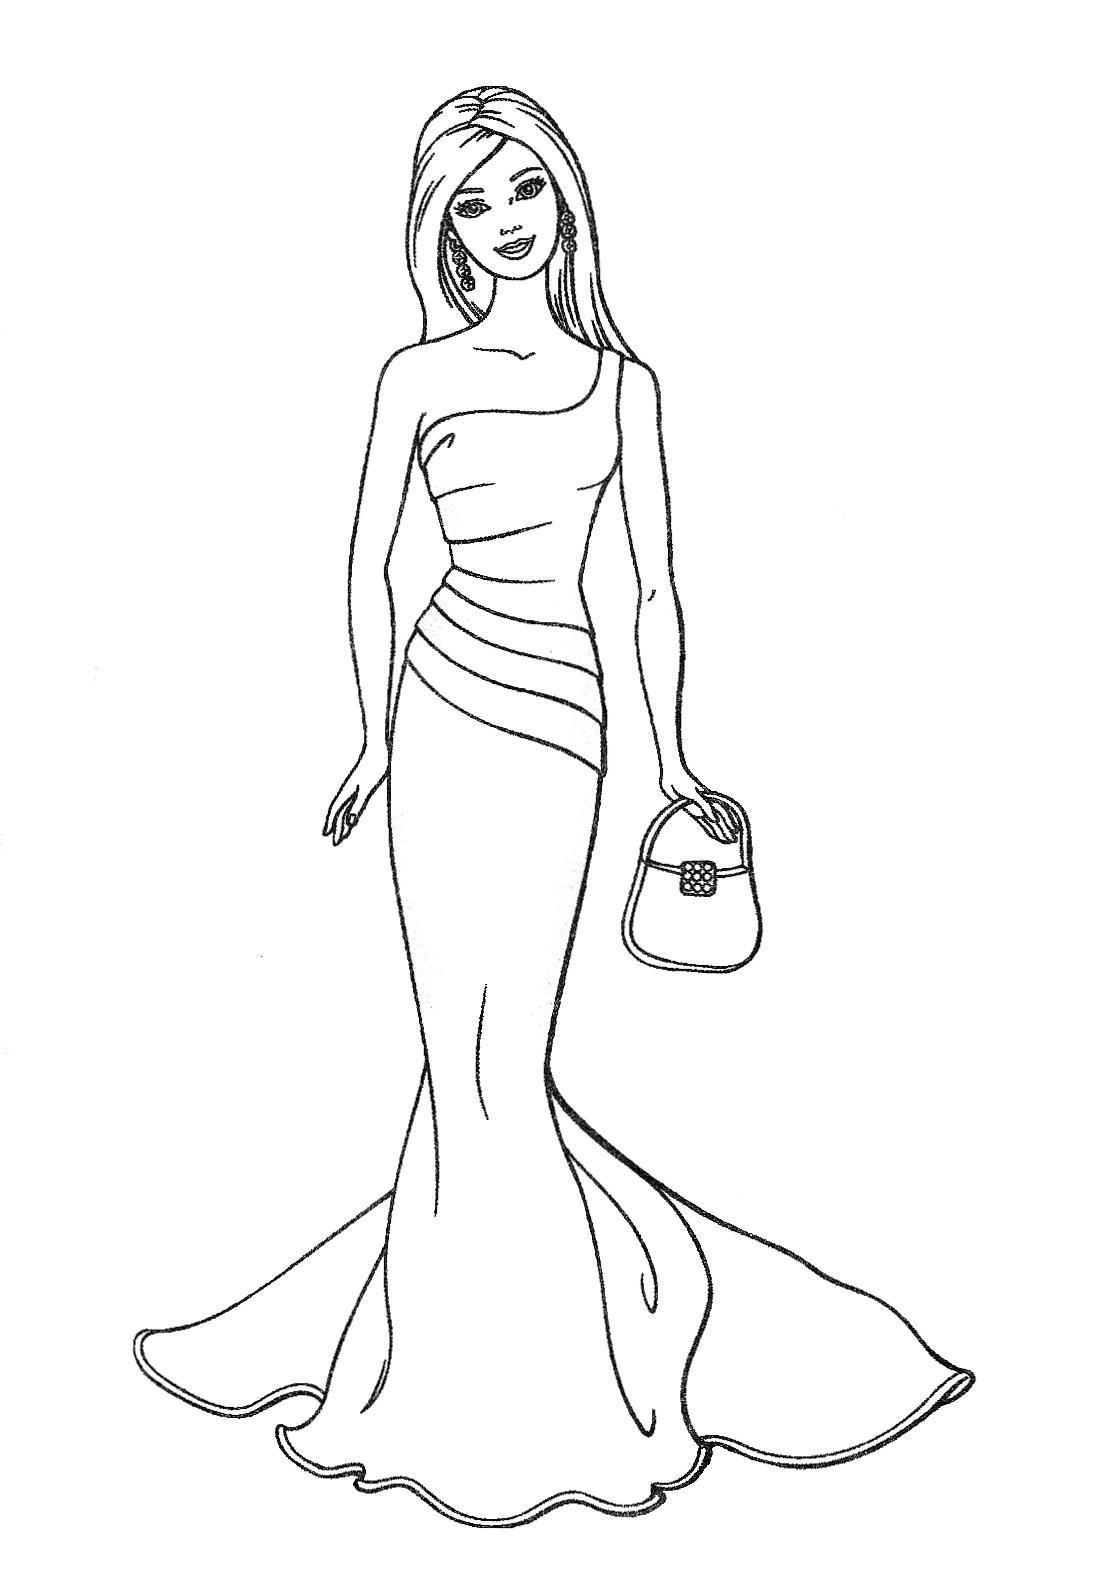 Barbie Pretty Dress Coloring Pages Free Printable Coloring Pages For Kids ~ Colouring ...